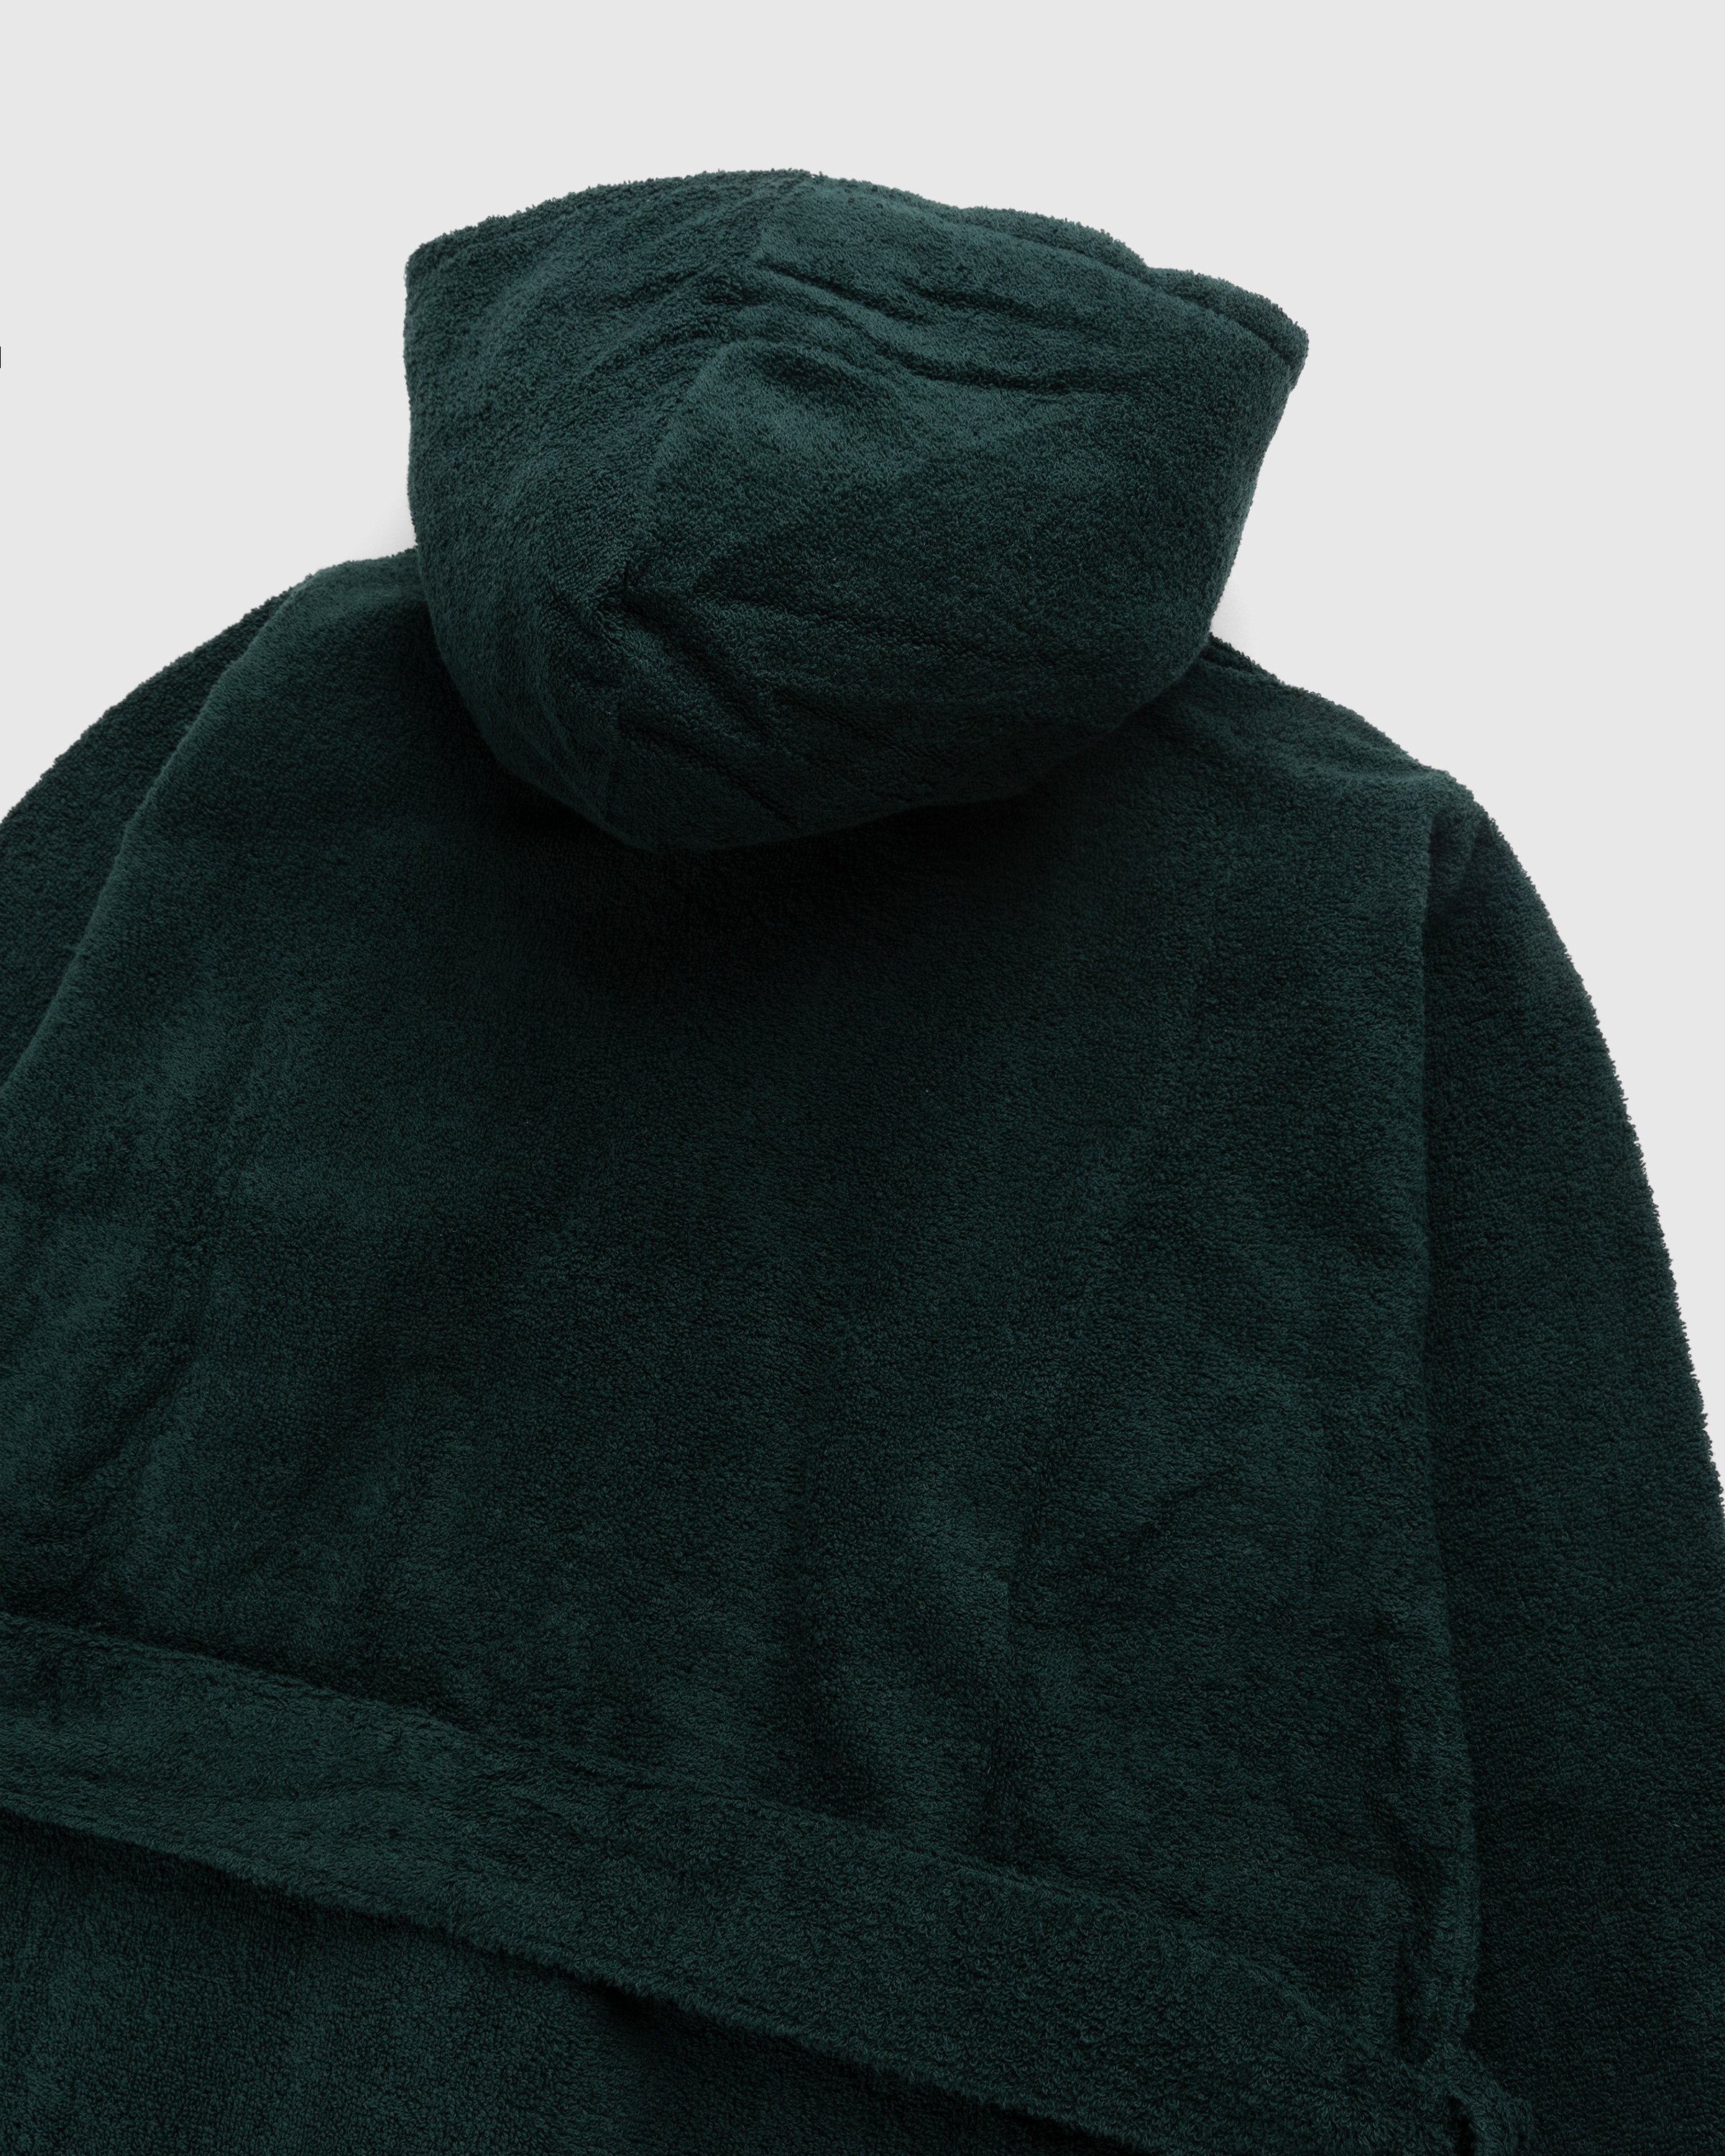 Tekla - Hooded Bathrobe Solid Forest Green - Lifestyle - Green - Image 4